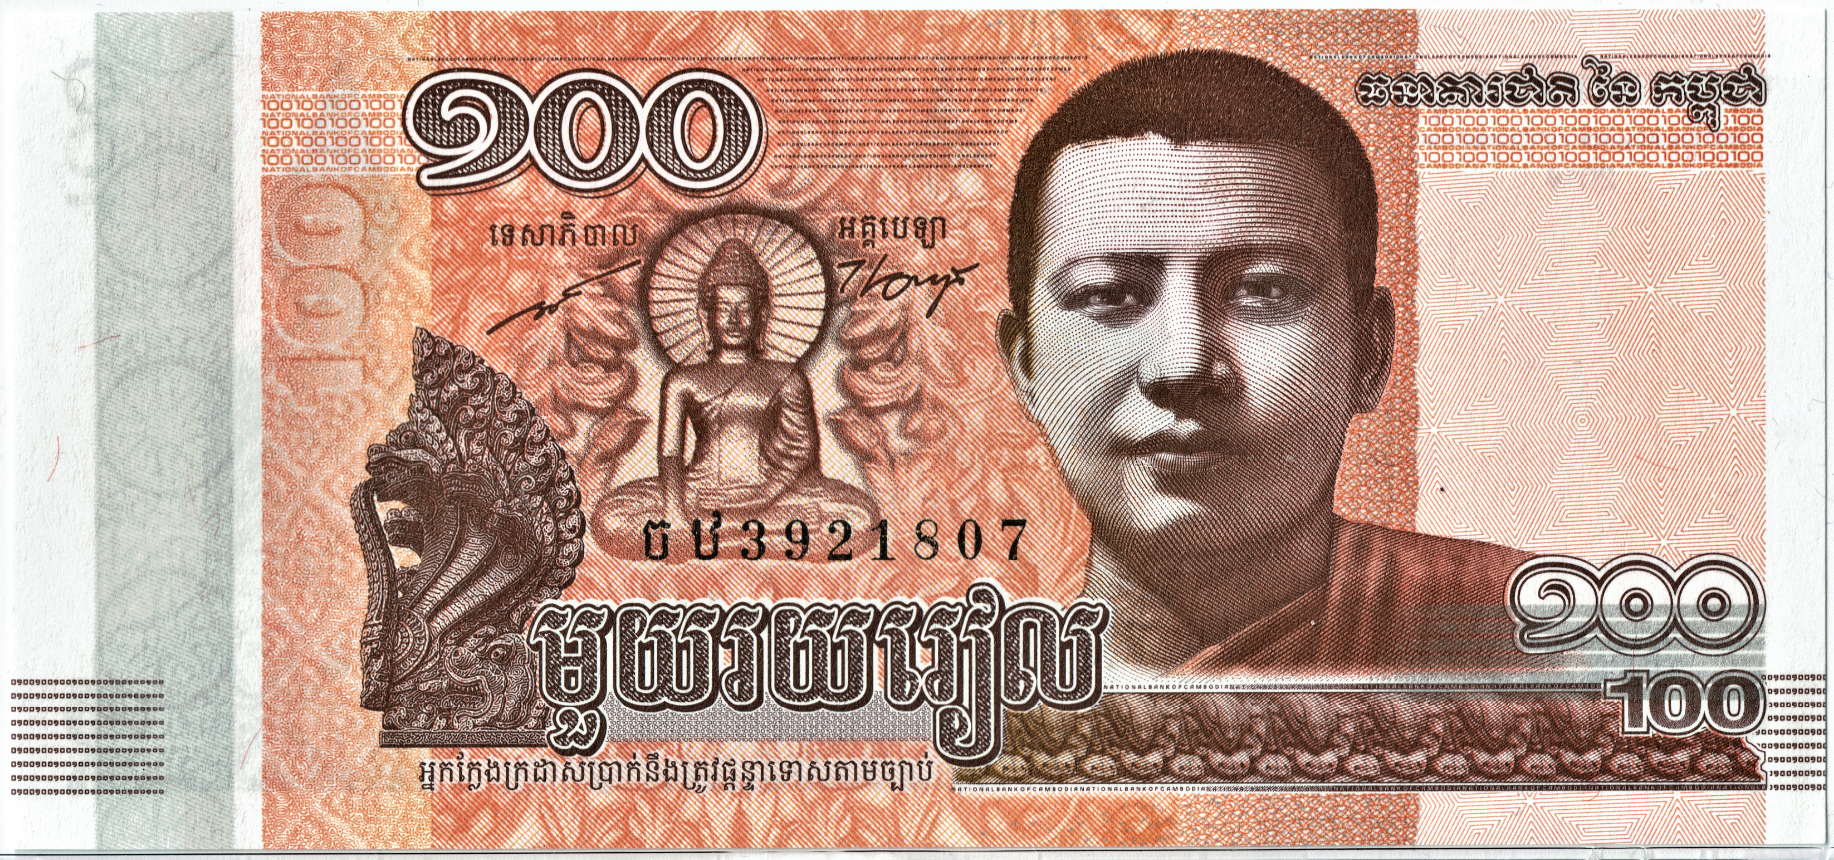 Cambodia 100 Riels Face_000057.png